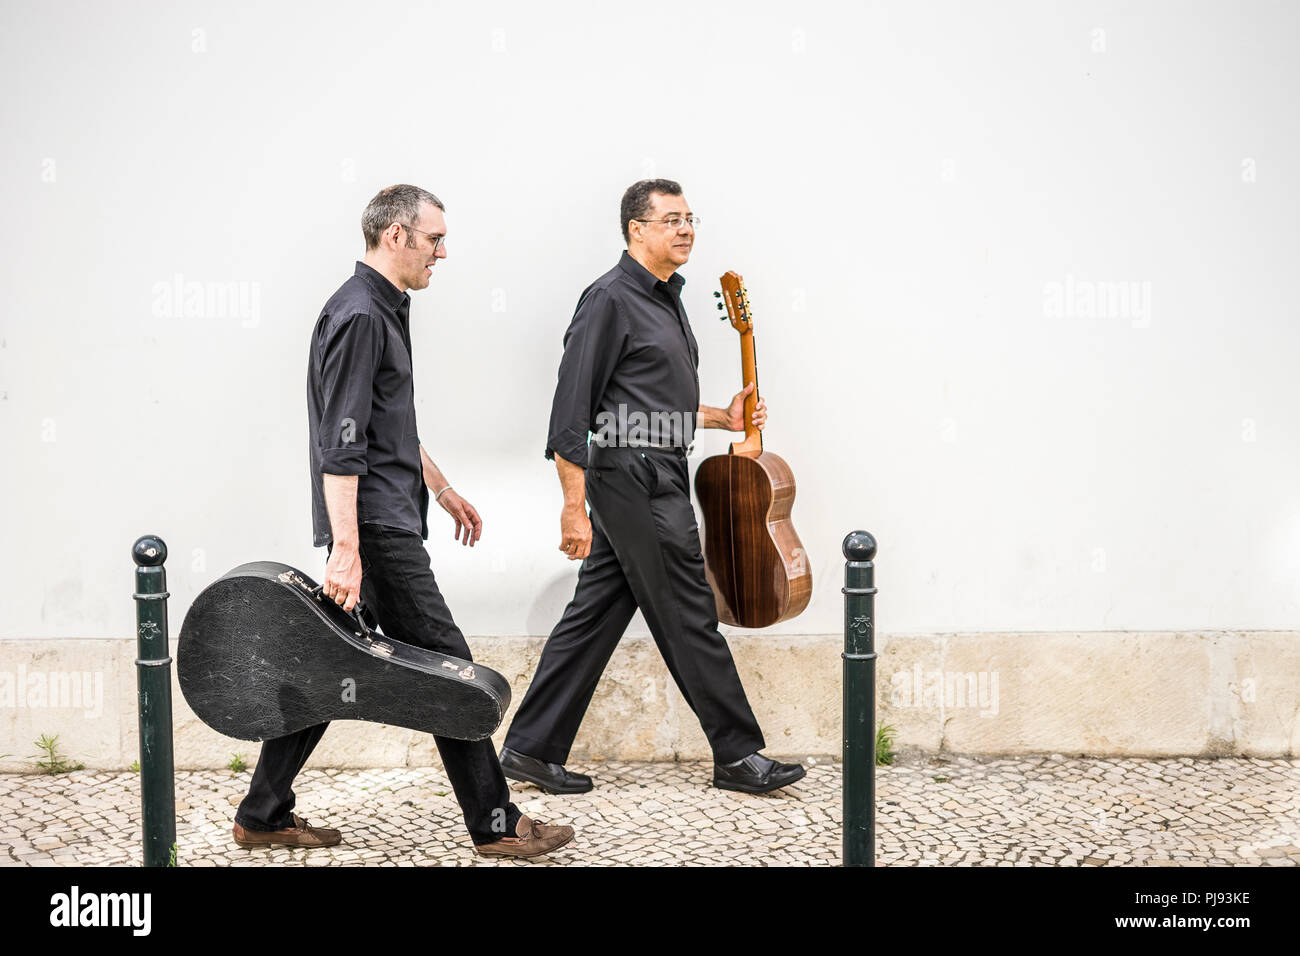 Two guitarists walking with their instruments on the pavement by the white wall Stock Photo